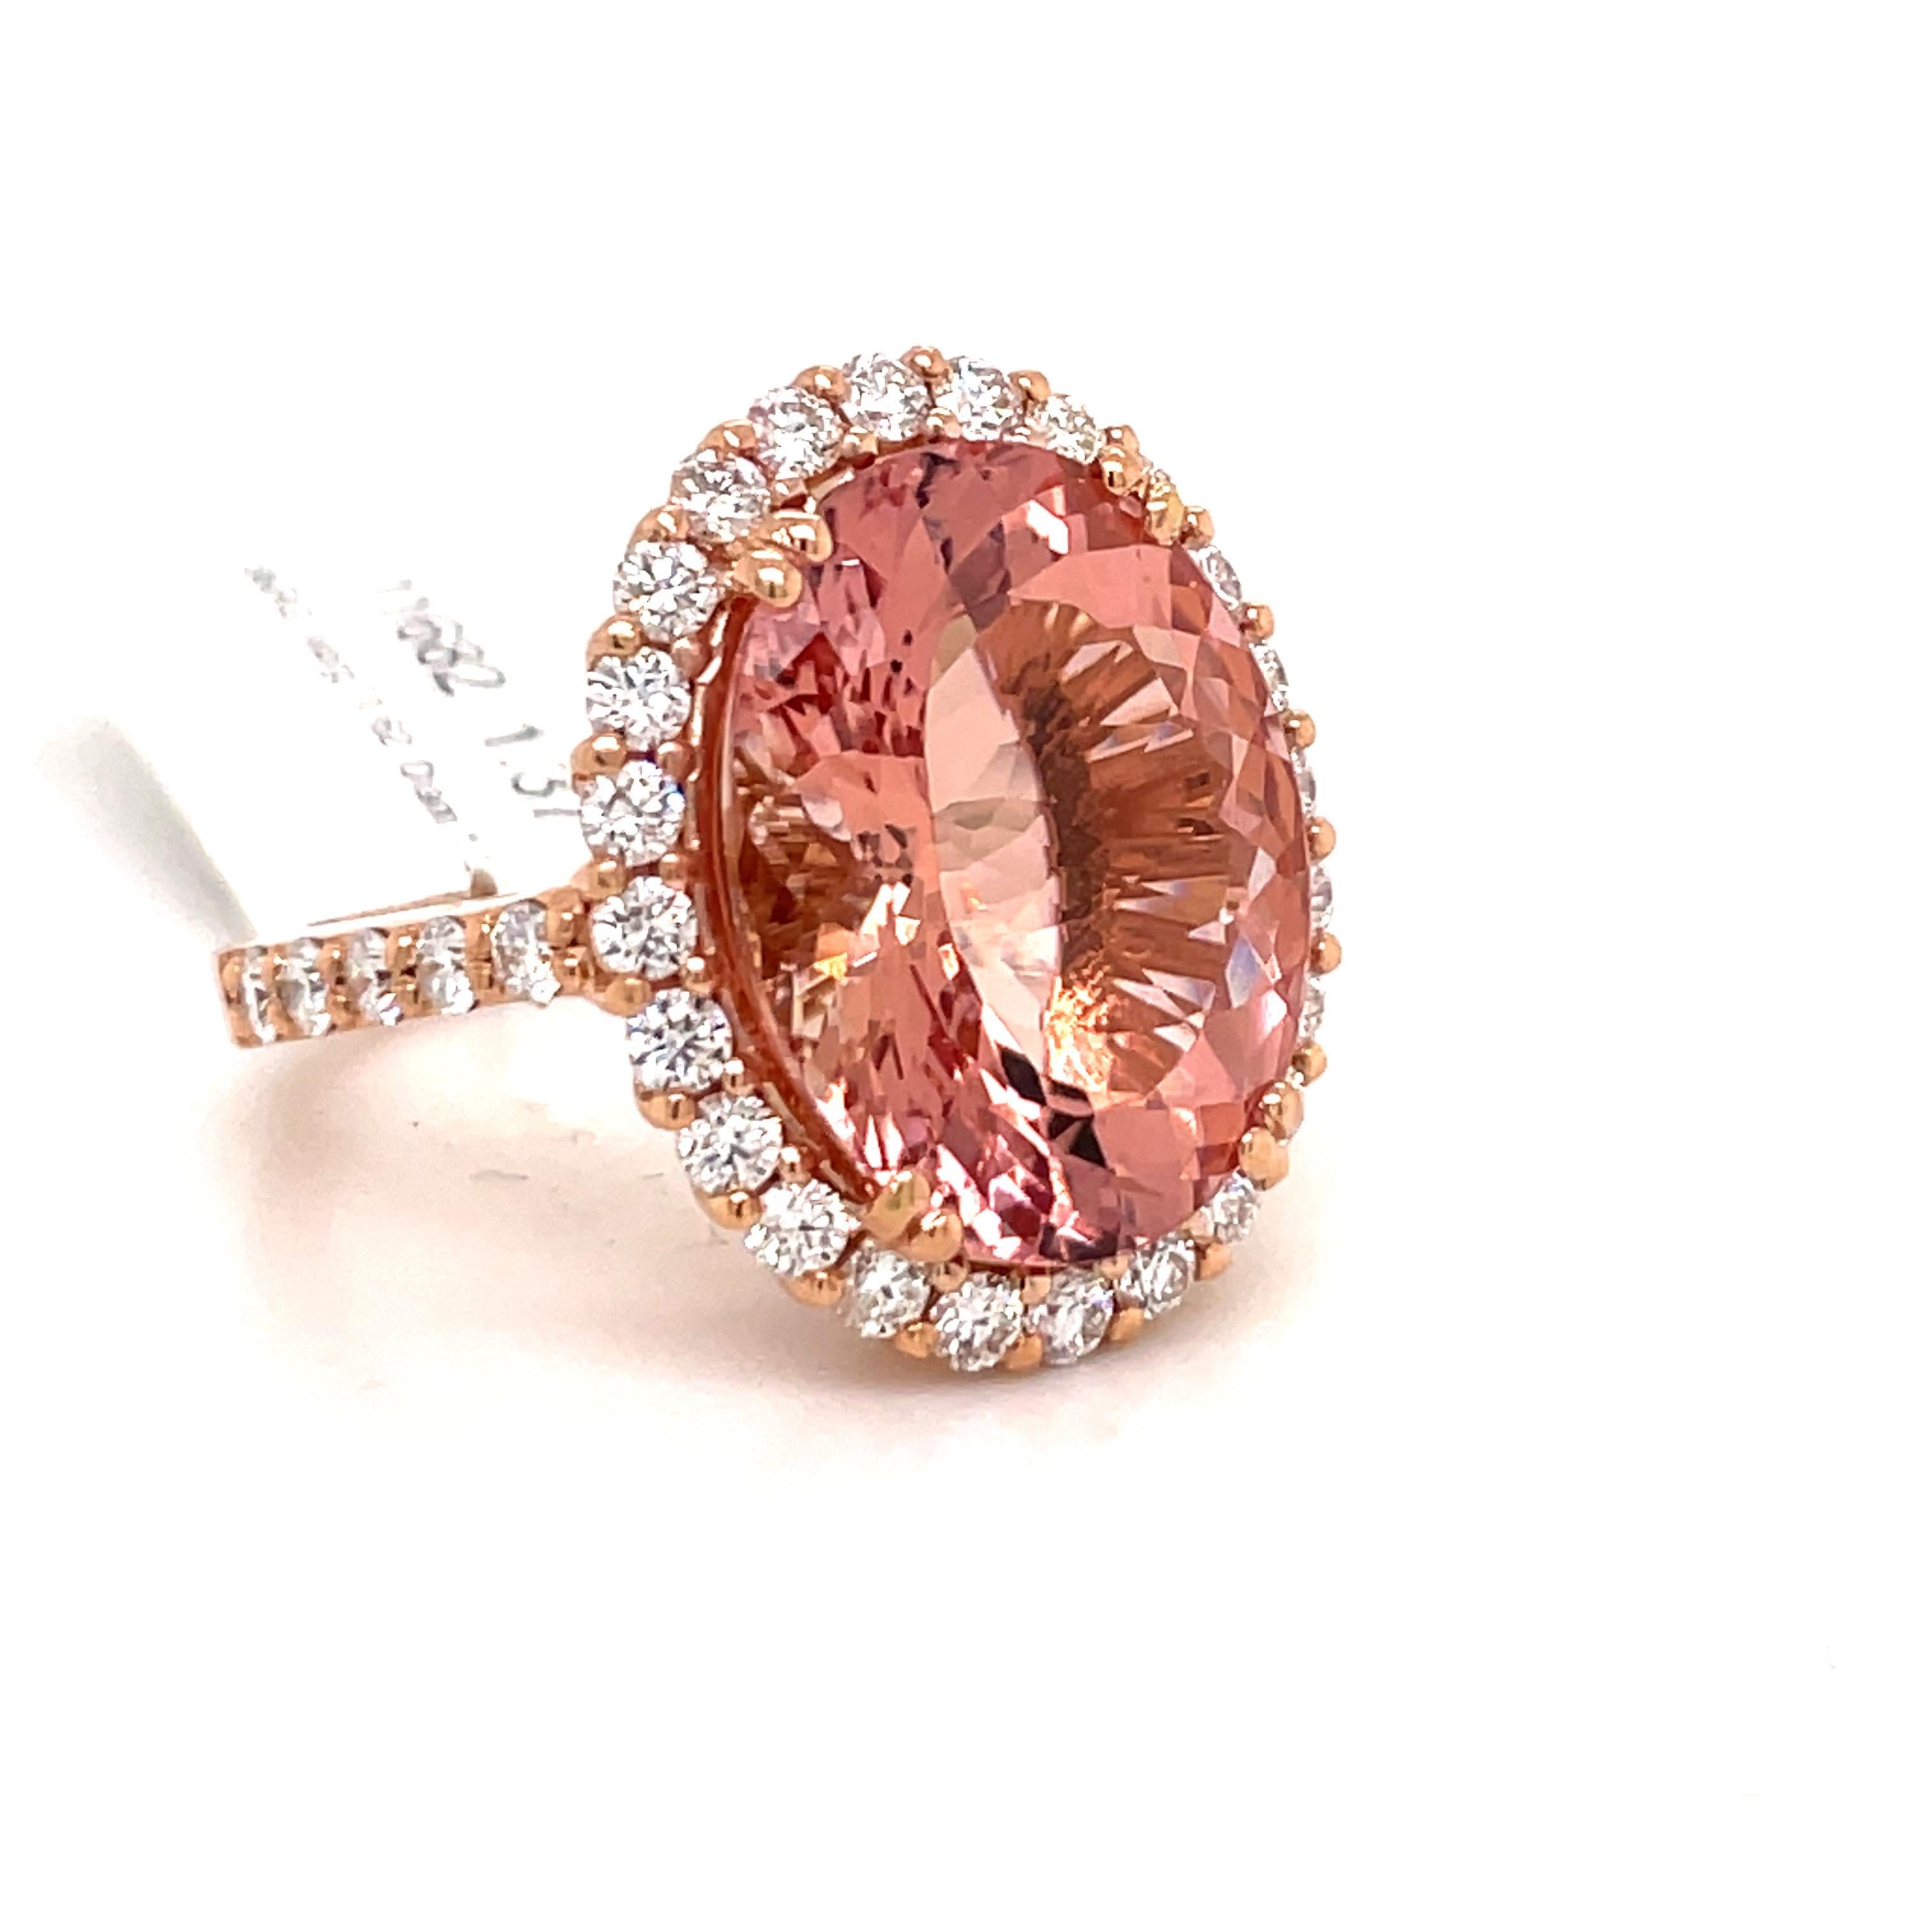 Oval Cut Morganite Diamond Halo Cocktail Ring 12.99 Carats 18 Karat Rose Gold For Sale 5